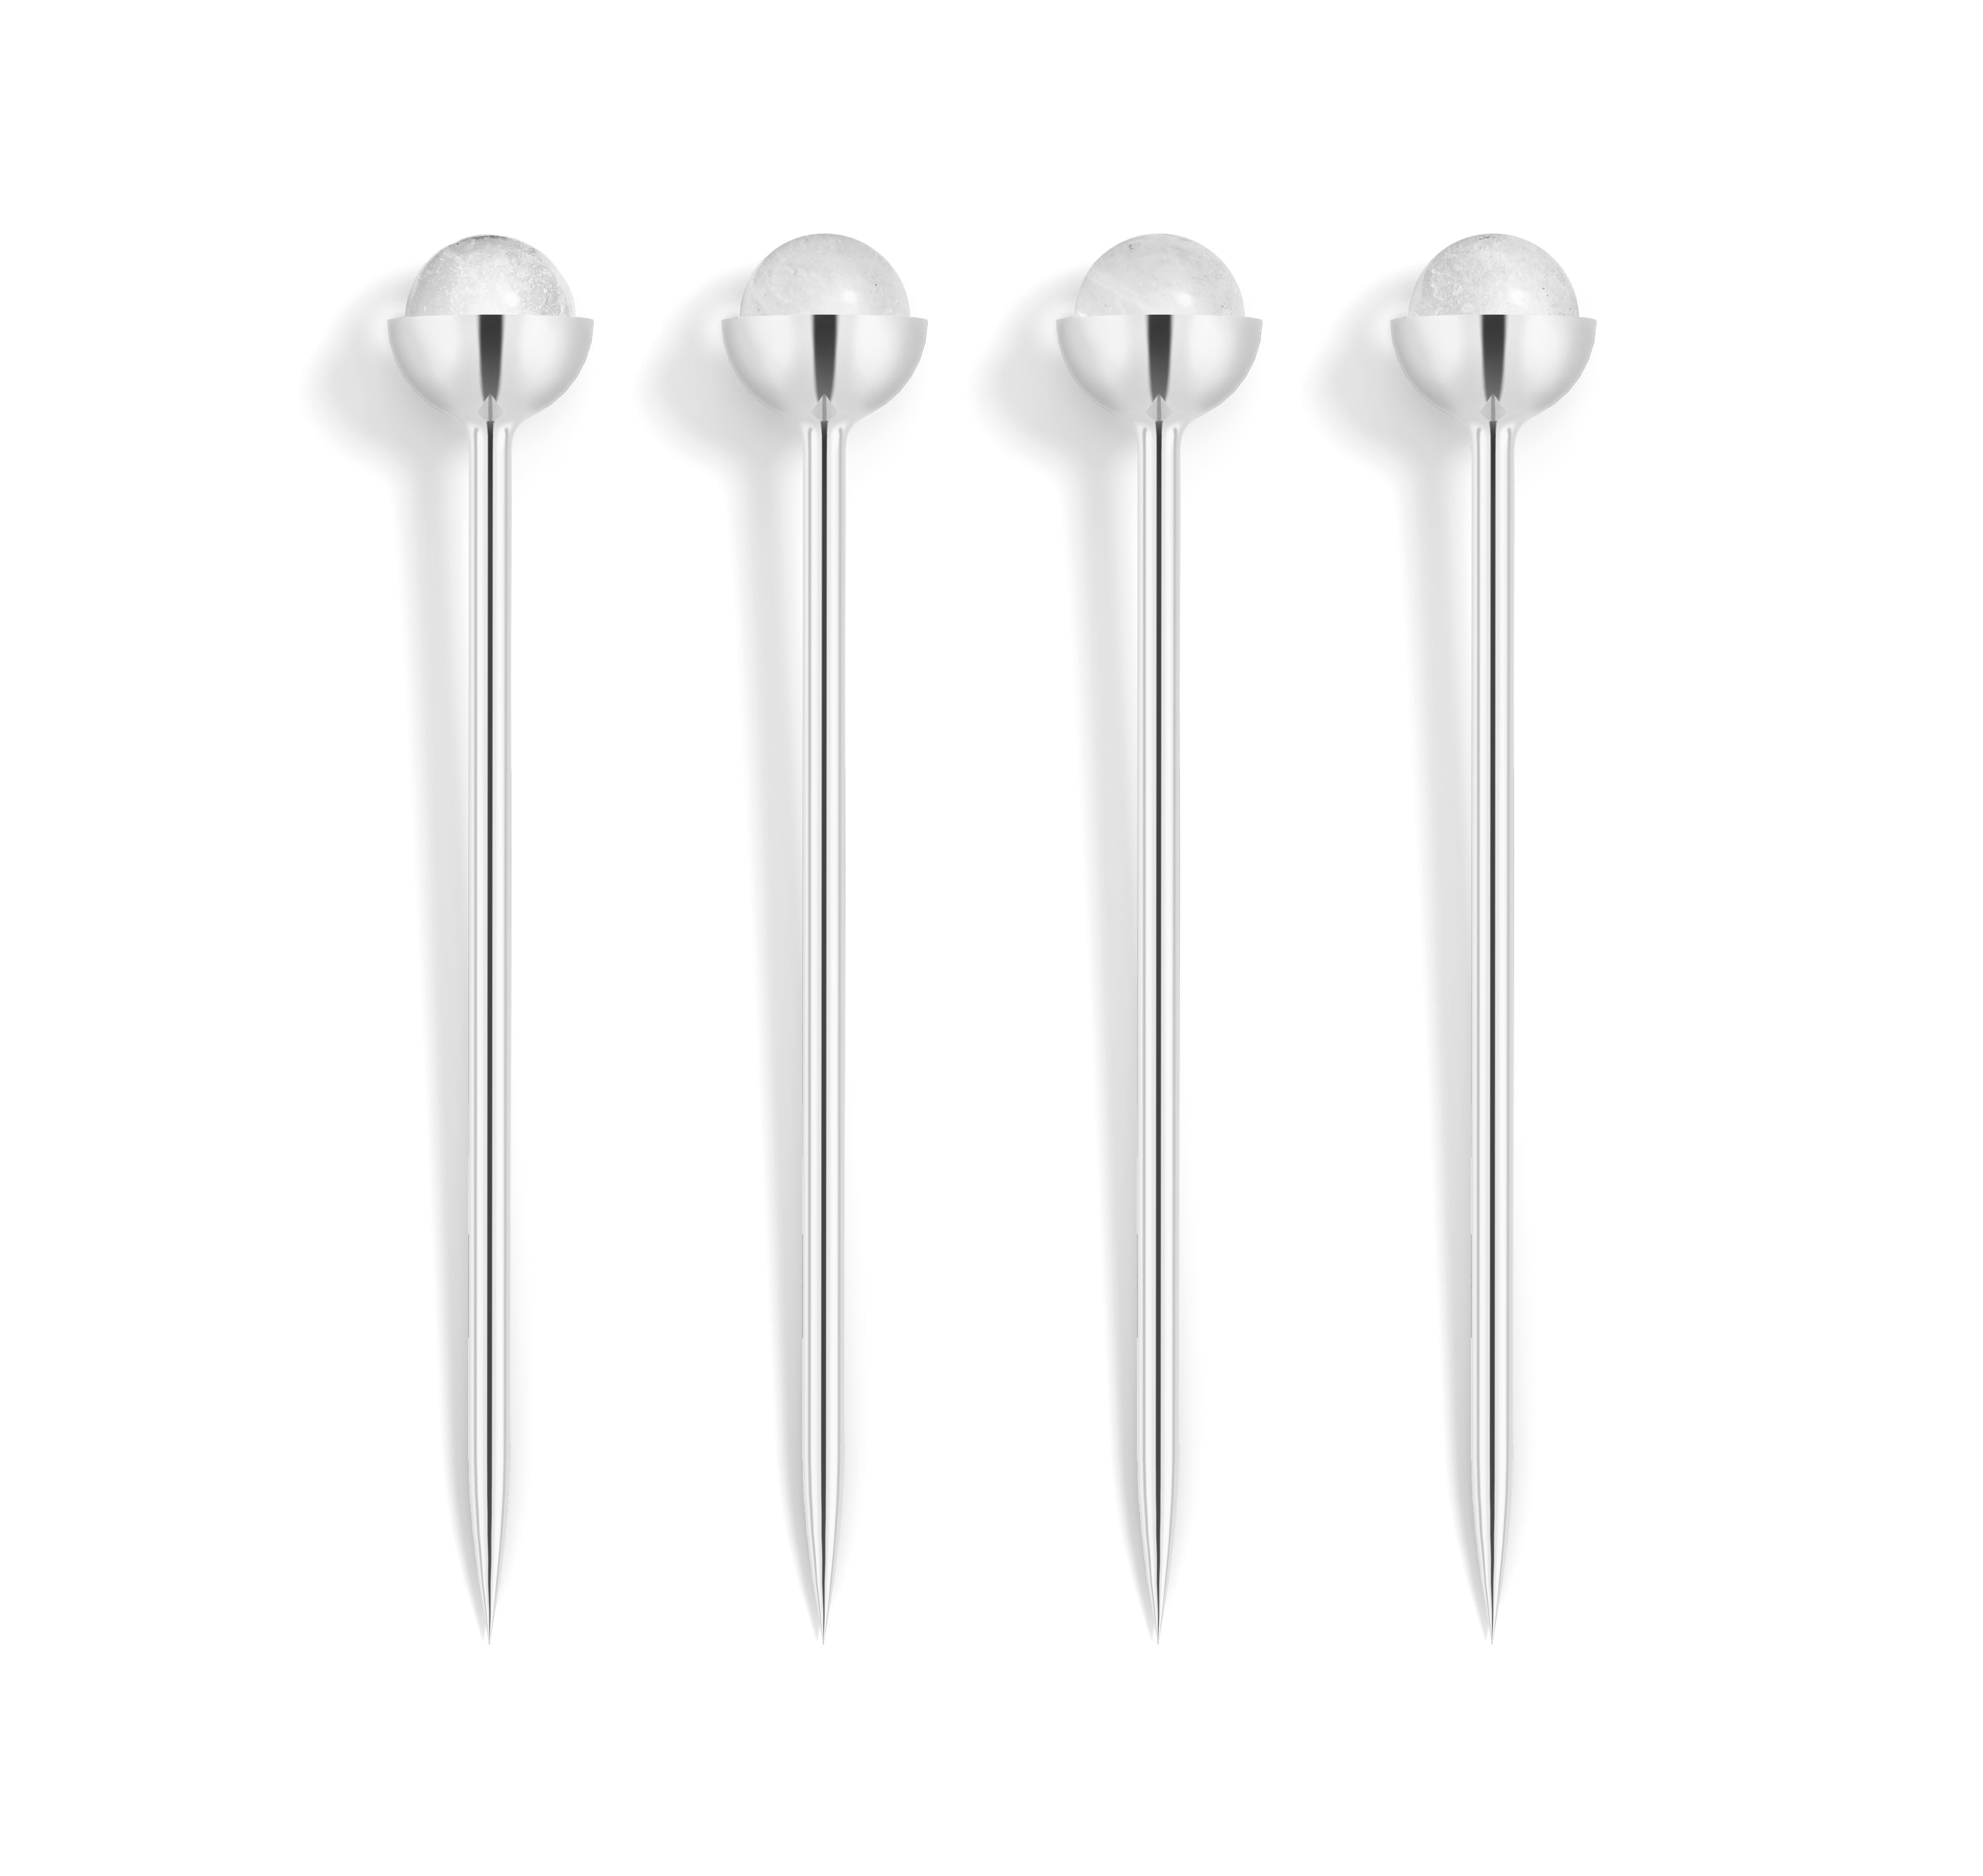 Hospitality Cocktail Picks, Silver & Crystal, Set of 4 by ANNA New York